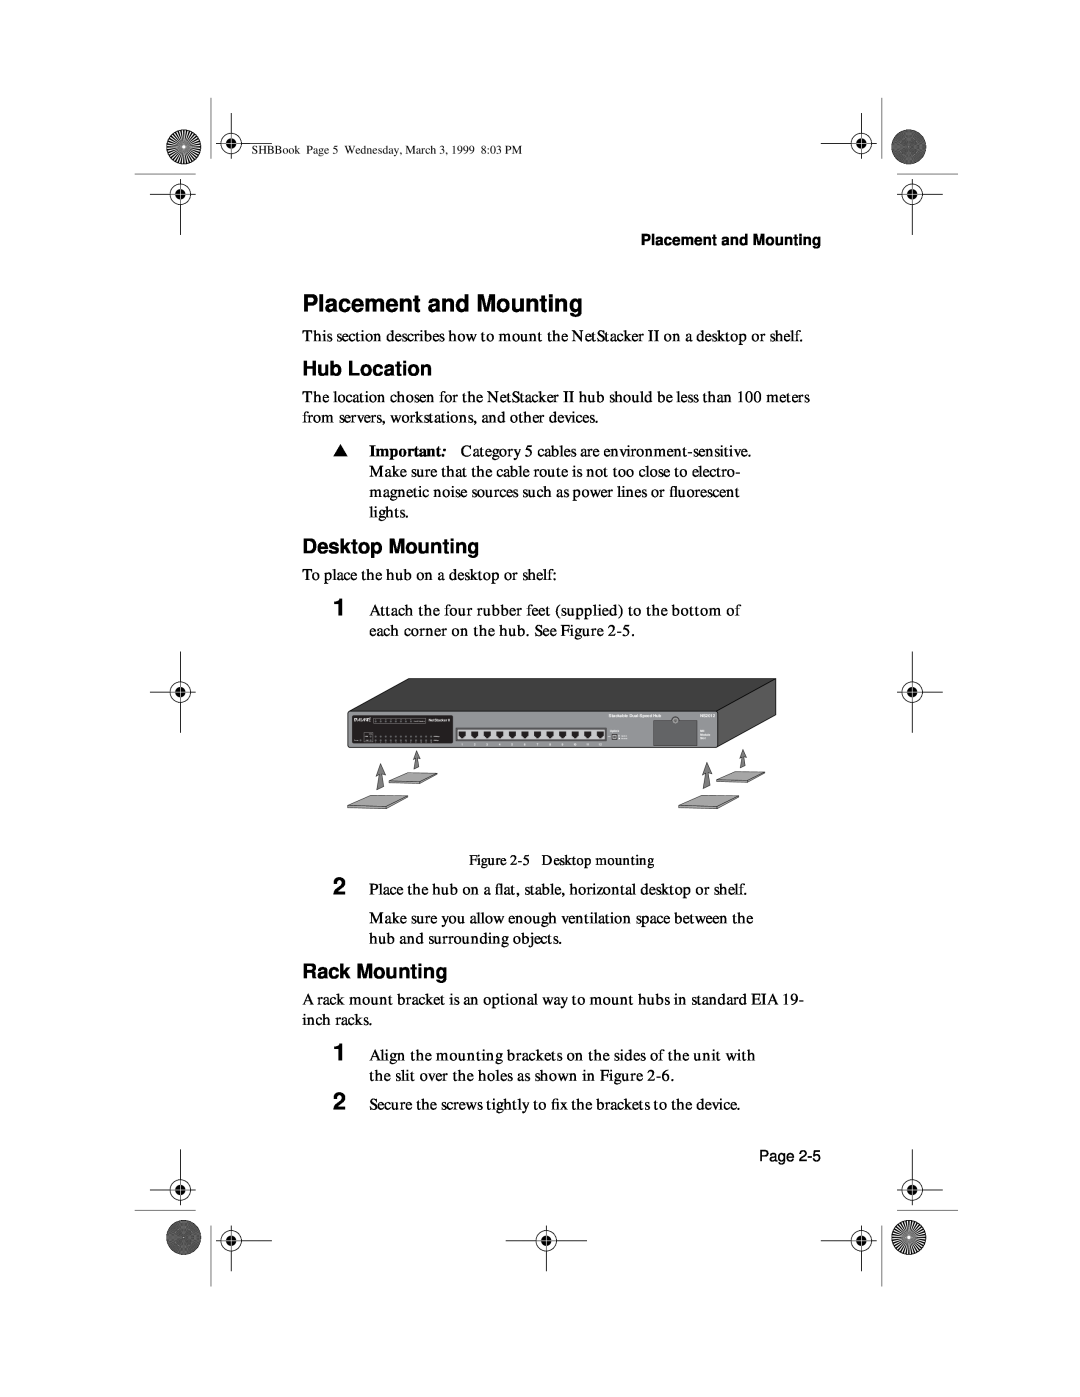 Asante Technologies II user manual Placement and Mounting, Hub Location, Desktop Mounting, Rack Mounting 